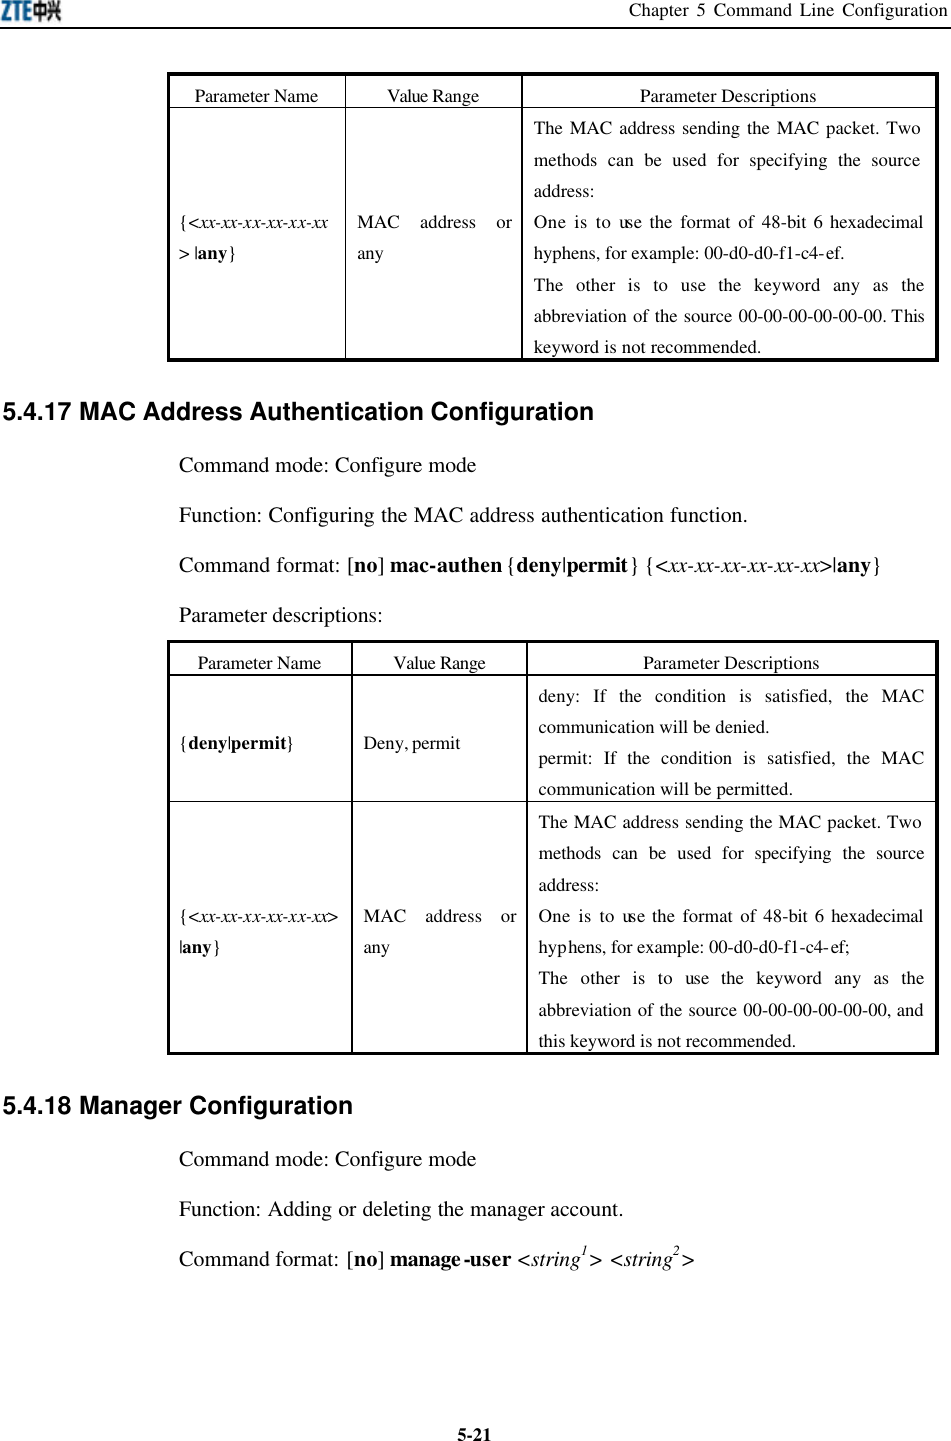 Chapter 5 Command Line Configuration  5-21Parameter Name Value Range Parameter Descriptions {&lt;xx-xx-xx-xx-xx-xx&gt; |any} MAC address or any The MAC address sending the MAC packet. Two methods can be used for specifying the source address:   One is to use the format of 48-bit 6 hexadecimal hyphens, for example: 00-d0-d0-f1-c4-ef. The other is to use the keyword any as the abbreviation of the source 00-00-00-00-00-00. This keyword is not recommended.  5.4.17 MAC Address Authentication Configuration   Command mode: Configure mode   Function: Configuring the MAC address authentication function.   Command format: [no] mac-authen {deny|permit} {&lt;xx-xx-xx-xx-xx-xx&gt;|any} Parameter descriptions:   Parameter Name Value Range Parameter Descriptions {deny|permit} Deny, permit deny: If the condition is satisfied, the MAC communication will be denied.   permit: If the condition is satisfied, the MAC communication will be permitted.   {&lt;xx-xx-xx-xx-xx-xx&gt; |any} MAC address or any The MAC address sending the MAC packet. Two methods can be used for specifying the source address:   One is to use the format of 48-bit 6 hexadecimal hyphens, for example: 00-d0-d0-f1-c4-ef;   The other is to use the keyword any as the abbreviation of the source 00-00-00-00-00-00, and this keyword is not recommended.   5.4.18 Manager Configuration   Command mode: Configure mode   Function: Adding or deleting the manager account.   Command format: [no] manage-user &lt;string1&gt; &lt;string2&gt;   